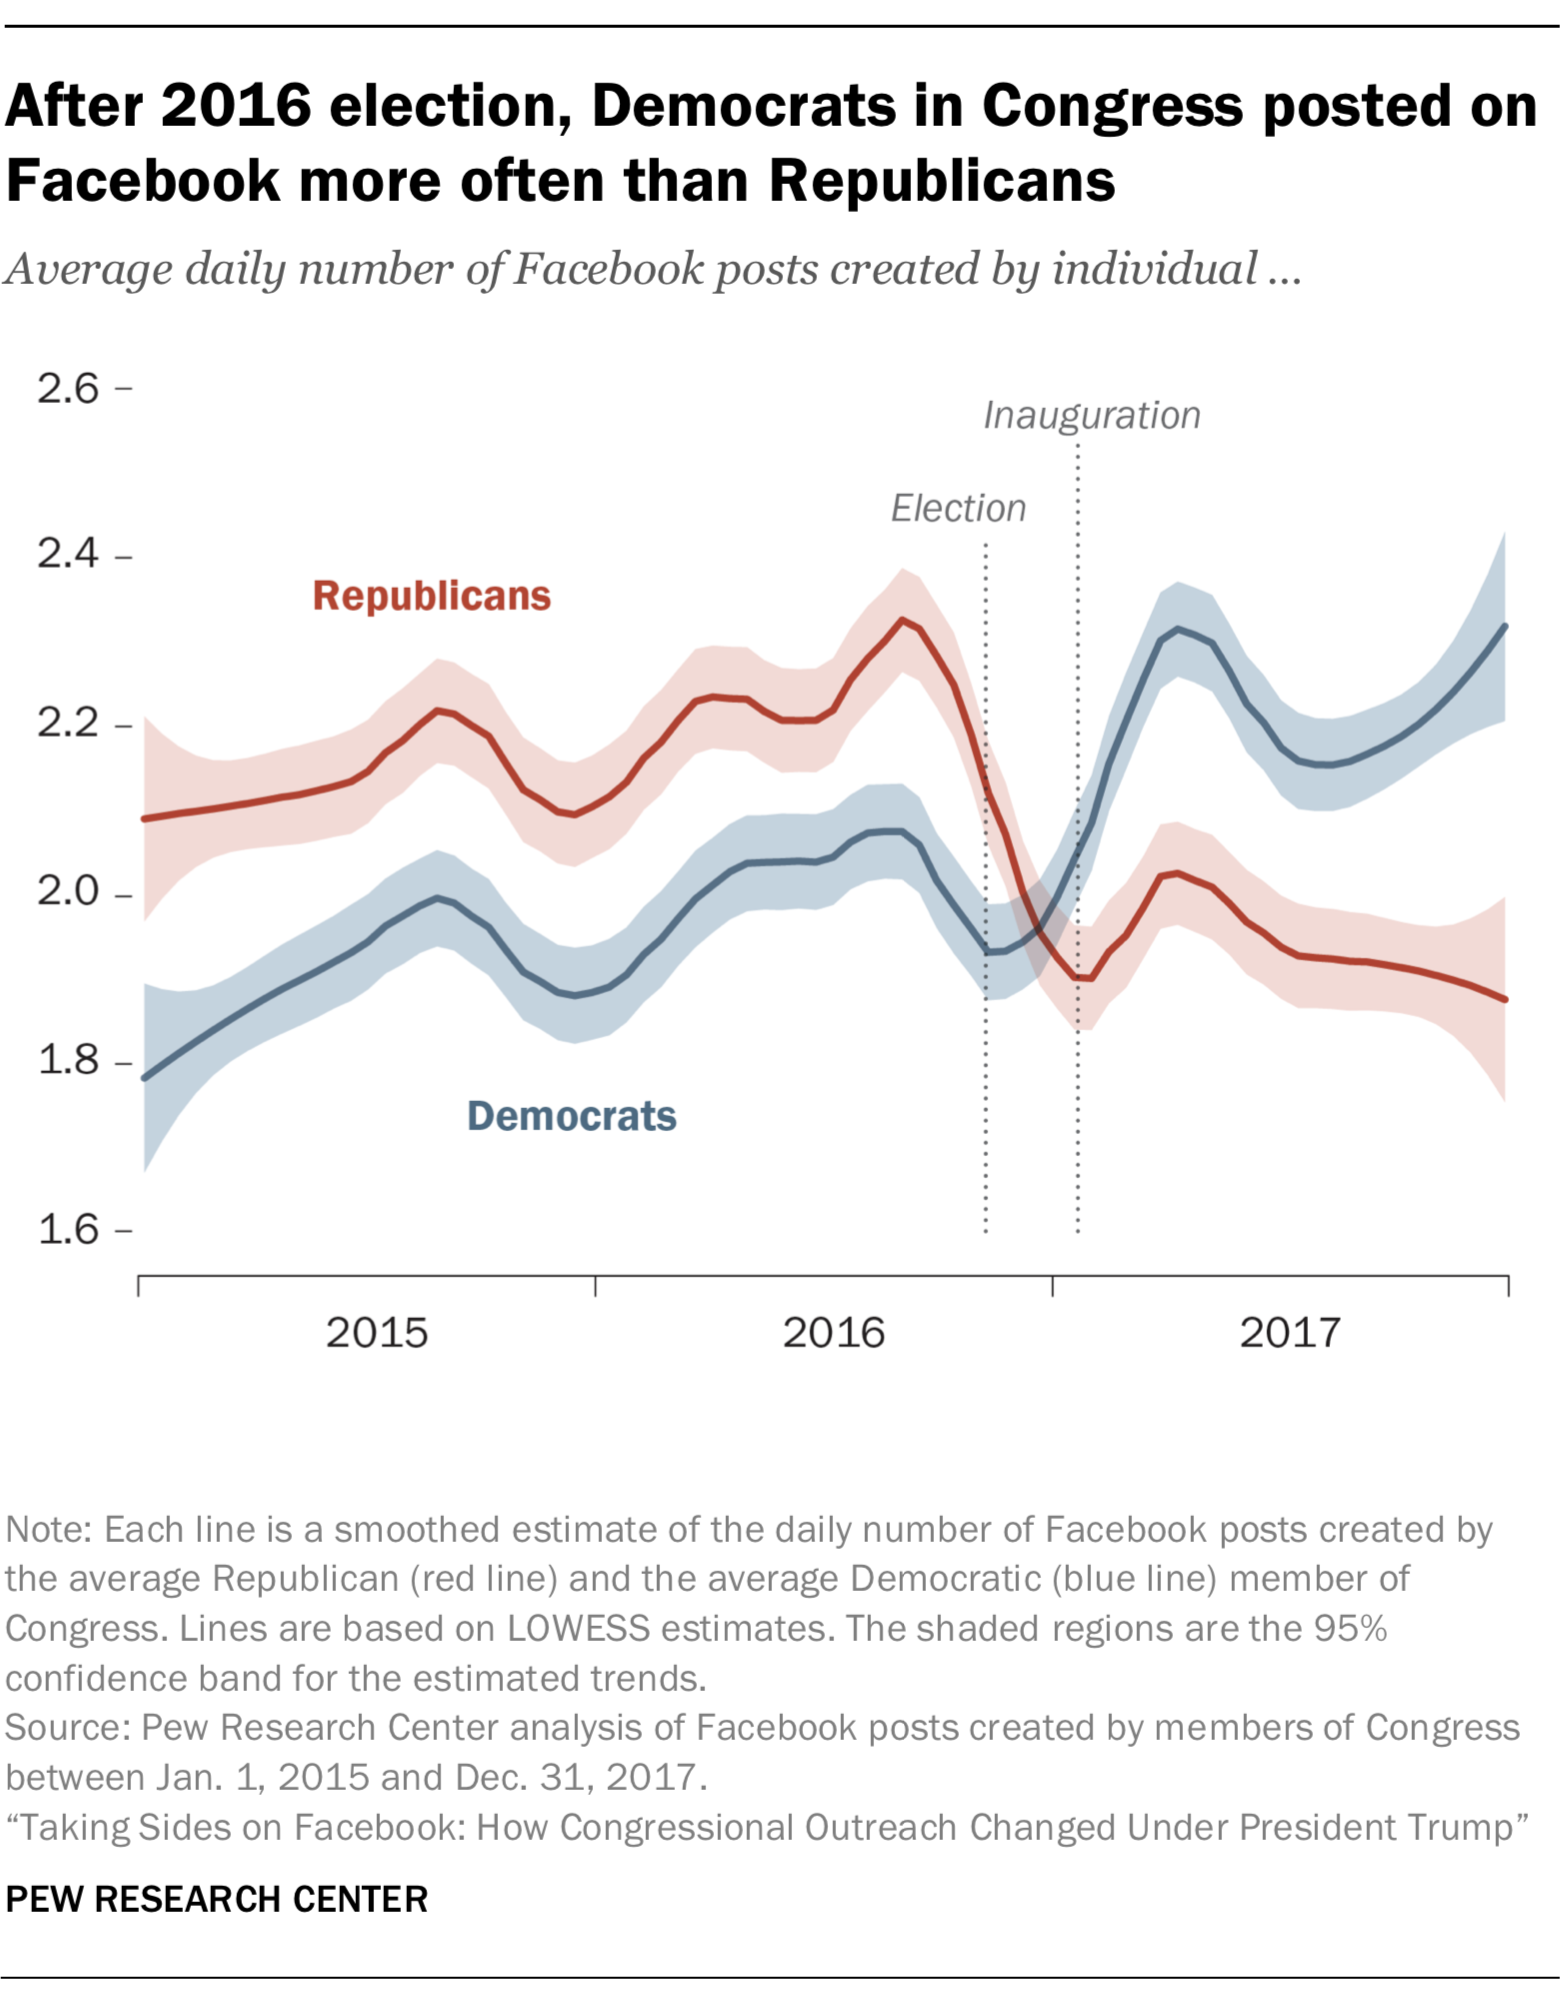 After 2016 election, Democrats in Congress posted on Facebook more often than Republicans